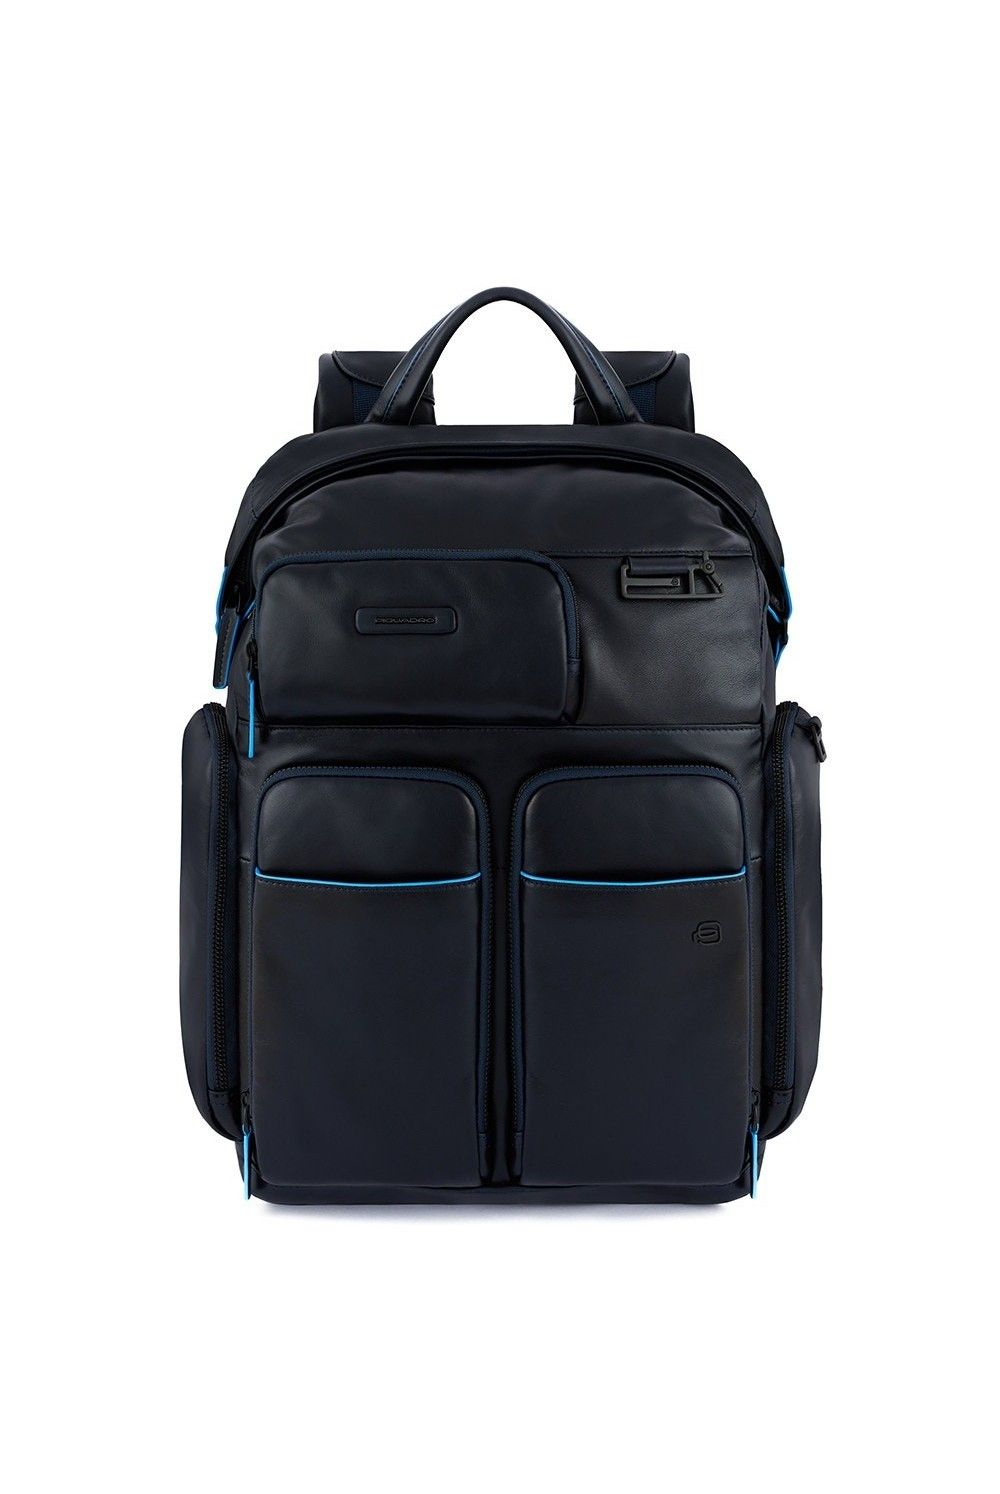 Laptop backpack Piquadro Blue Square 15.6 inches made of leather